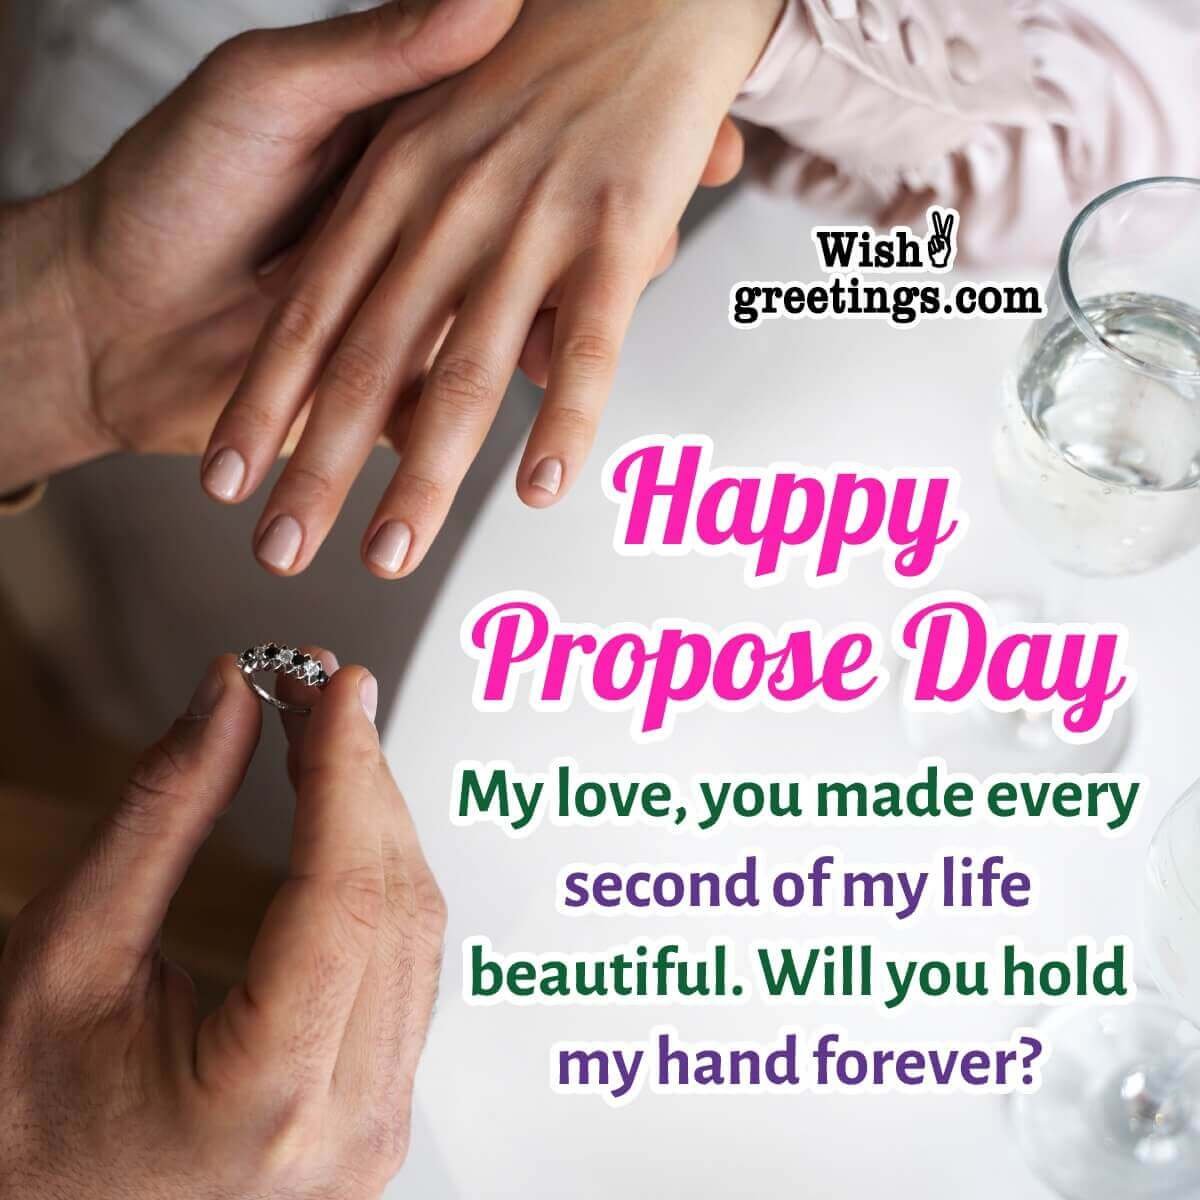 Happy Propose Day Wishes - Wish Greetings